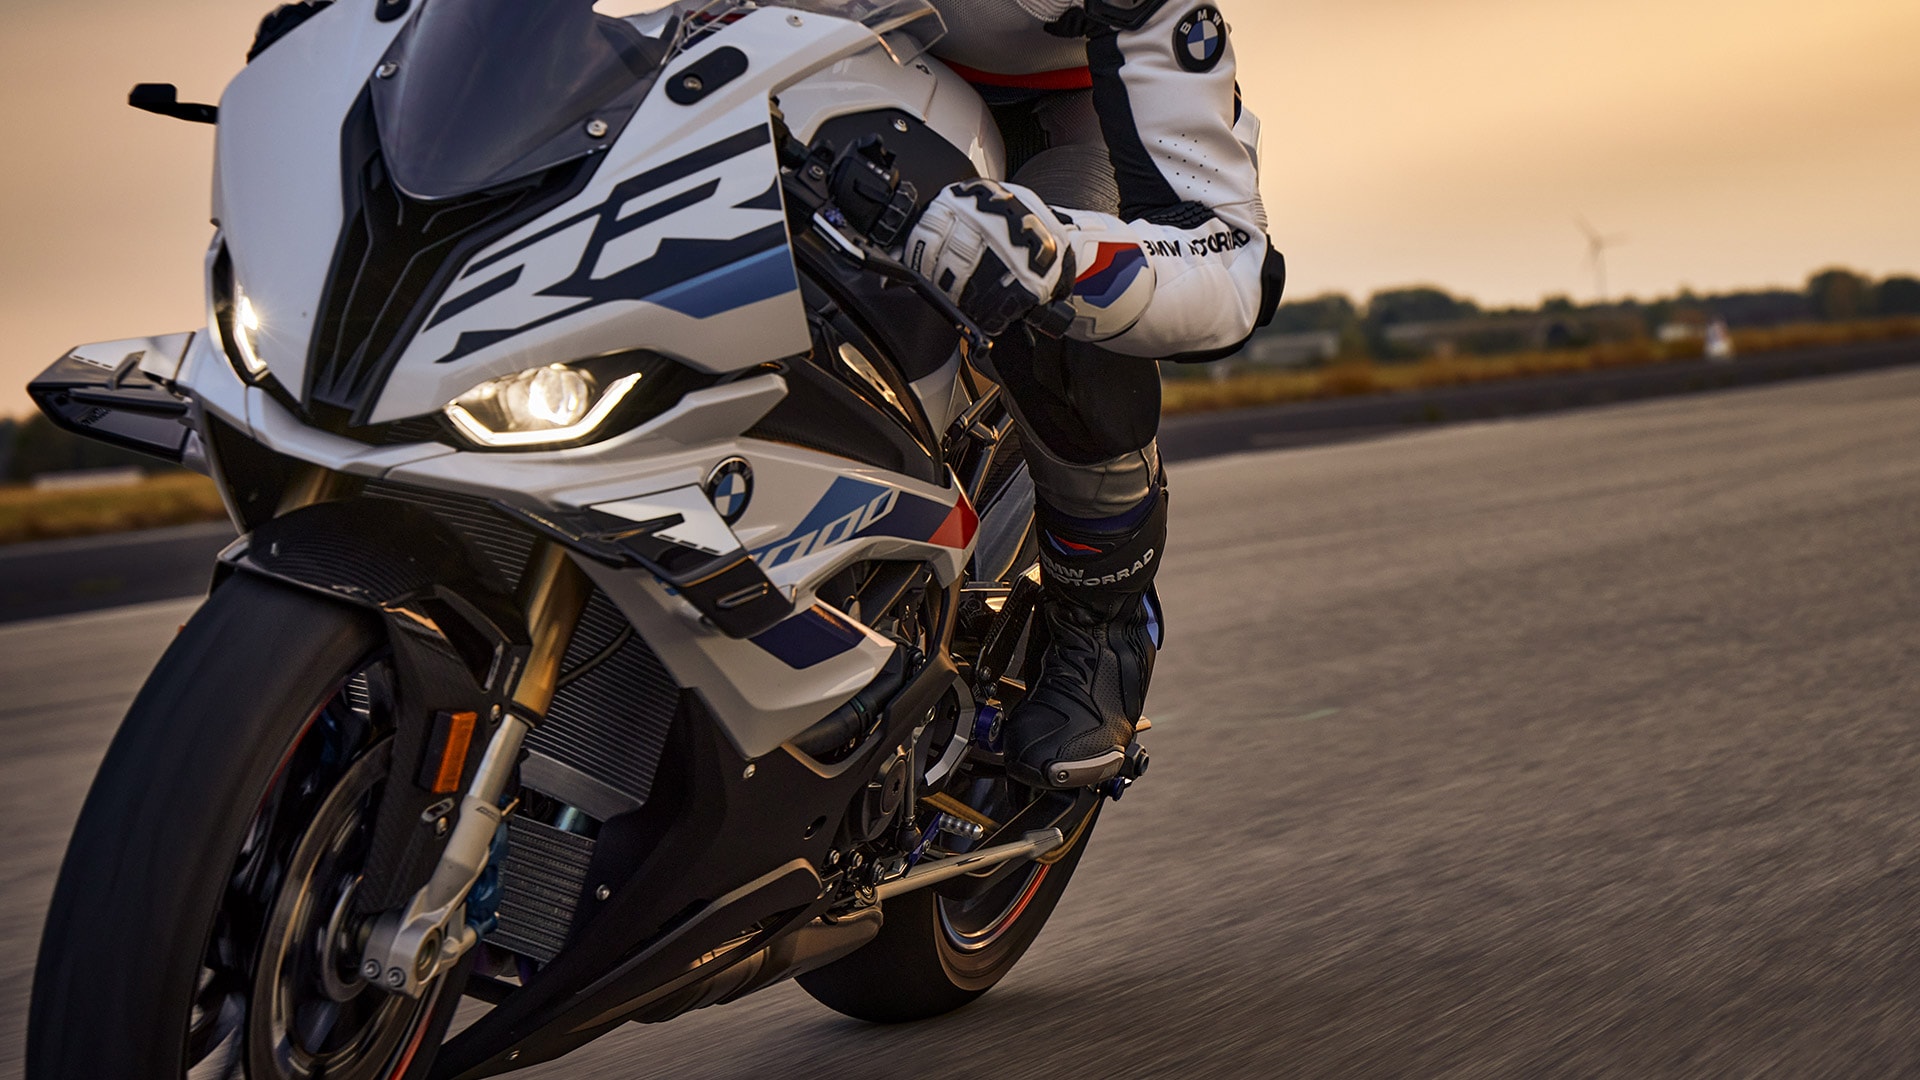 BMW S1000RR Price in India